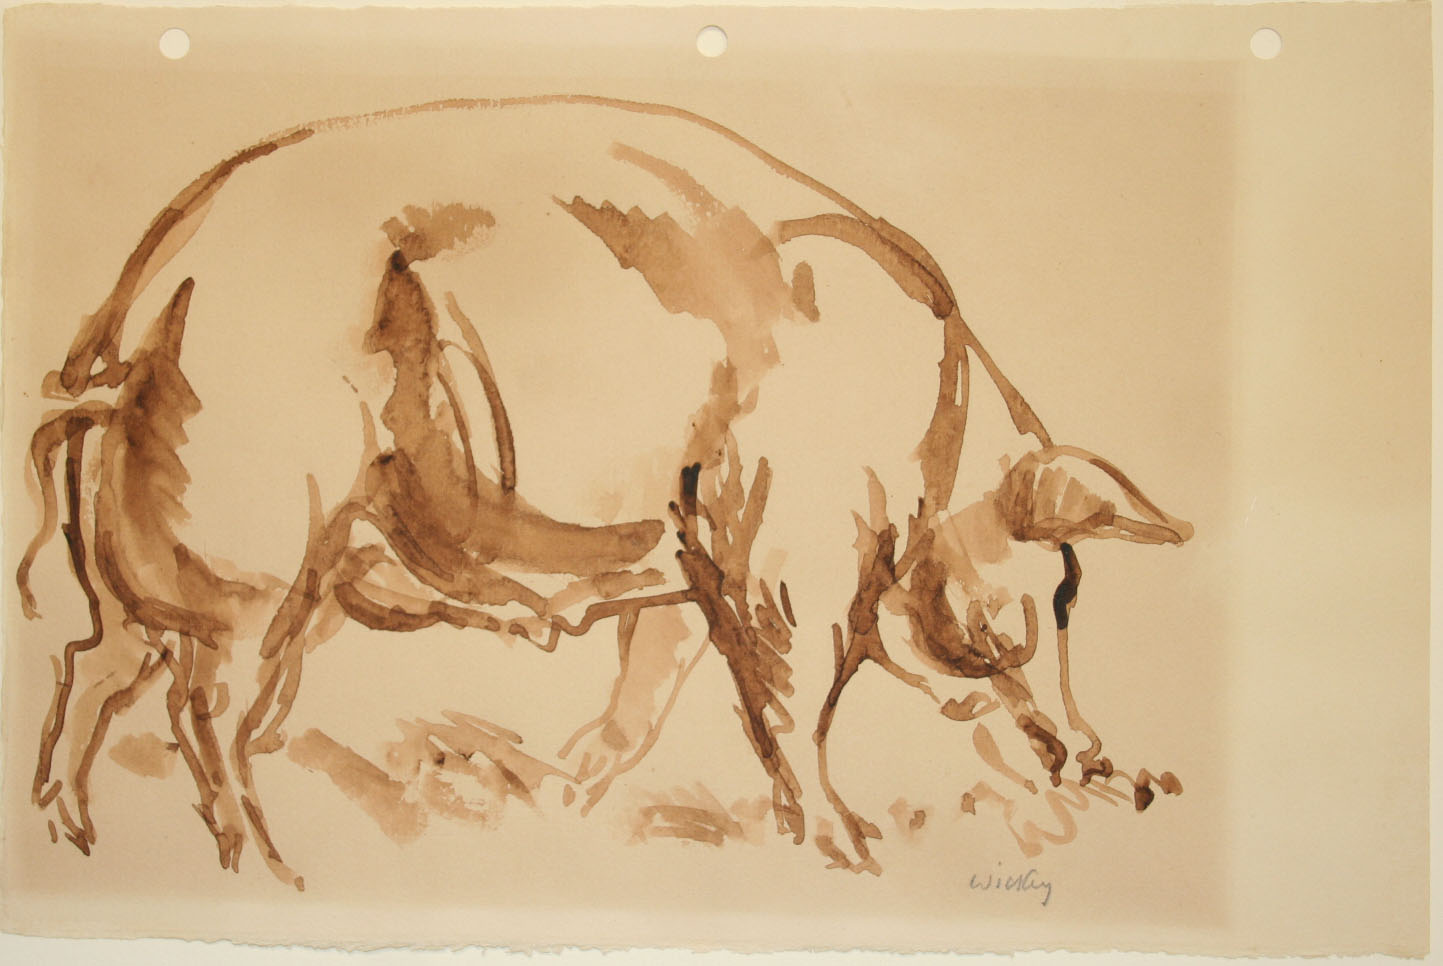 Harry Wickey, (American, 1892-1968), <i>Hog</i>, after 1935, wash drawing. Museums Collections, Gift of Mrs. John Sloan